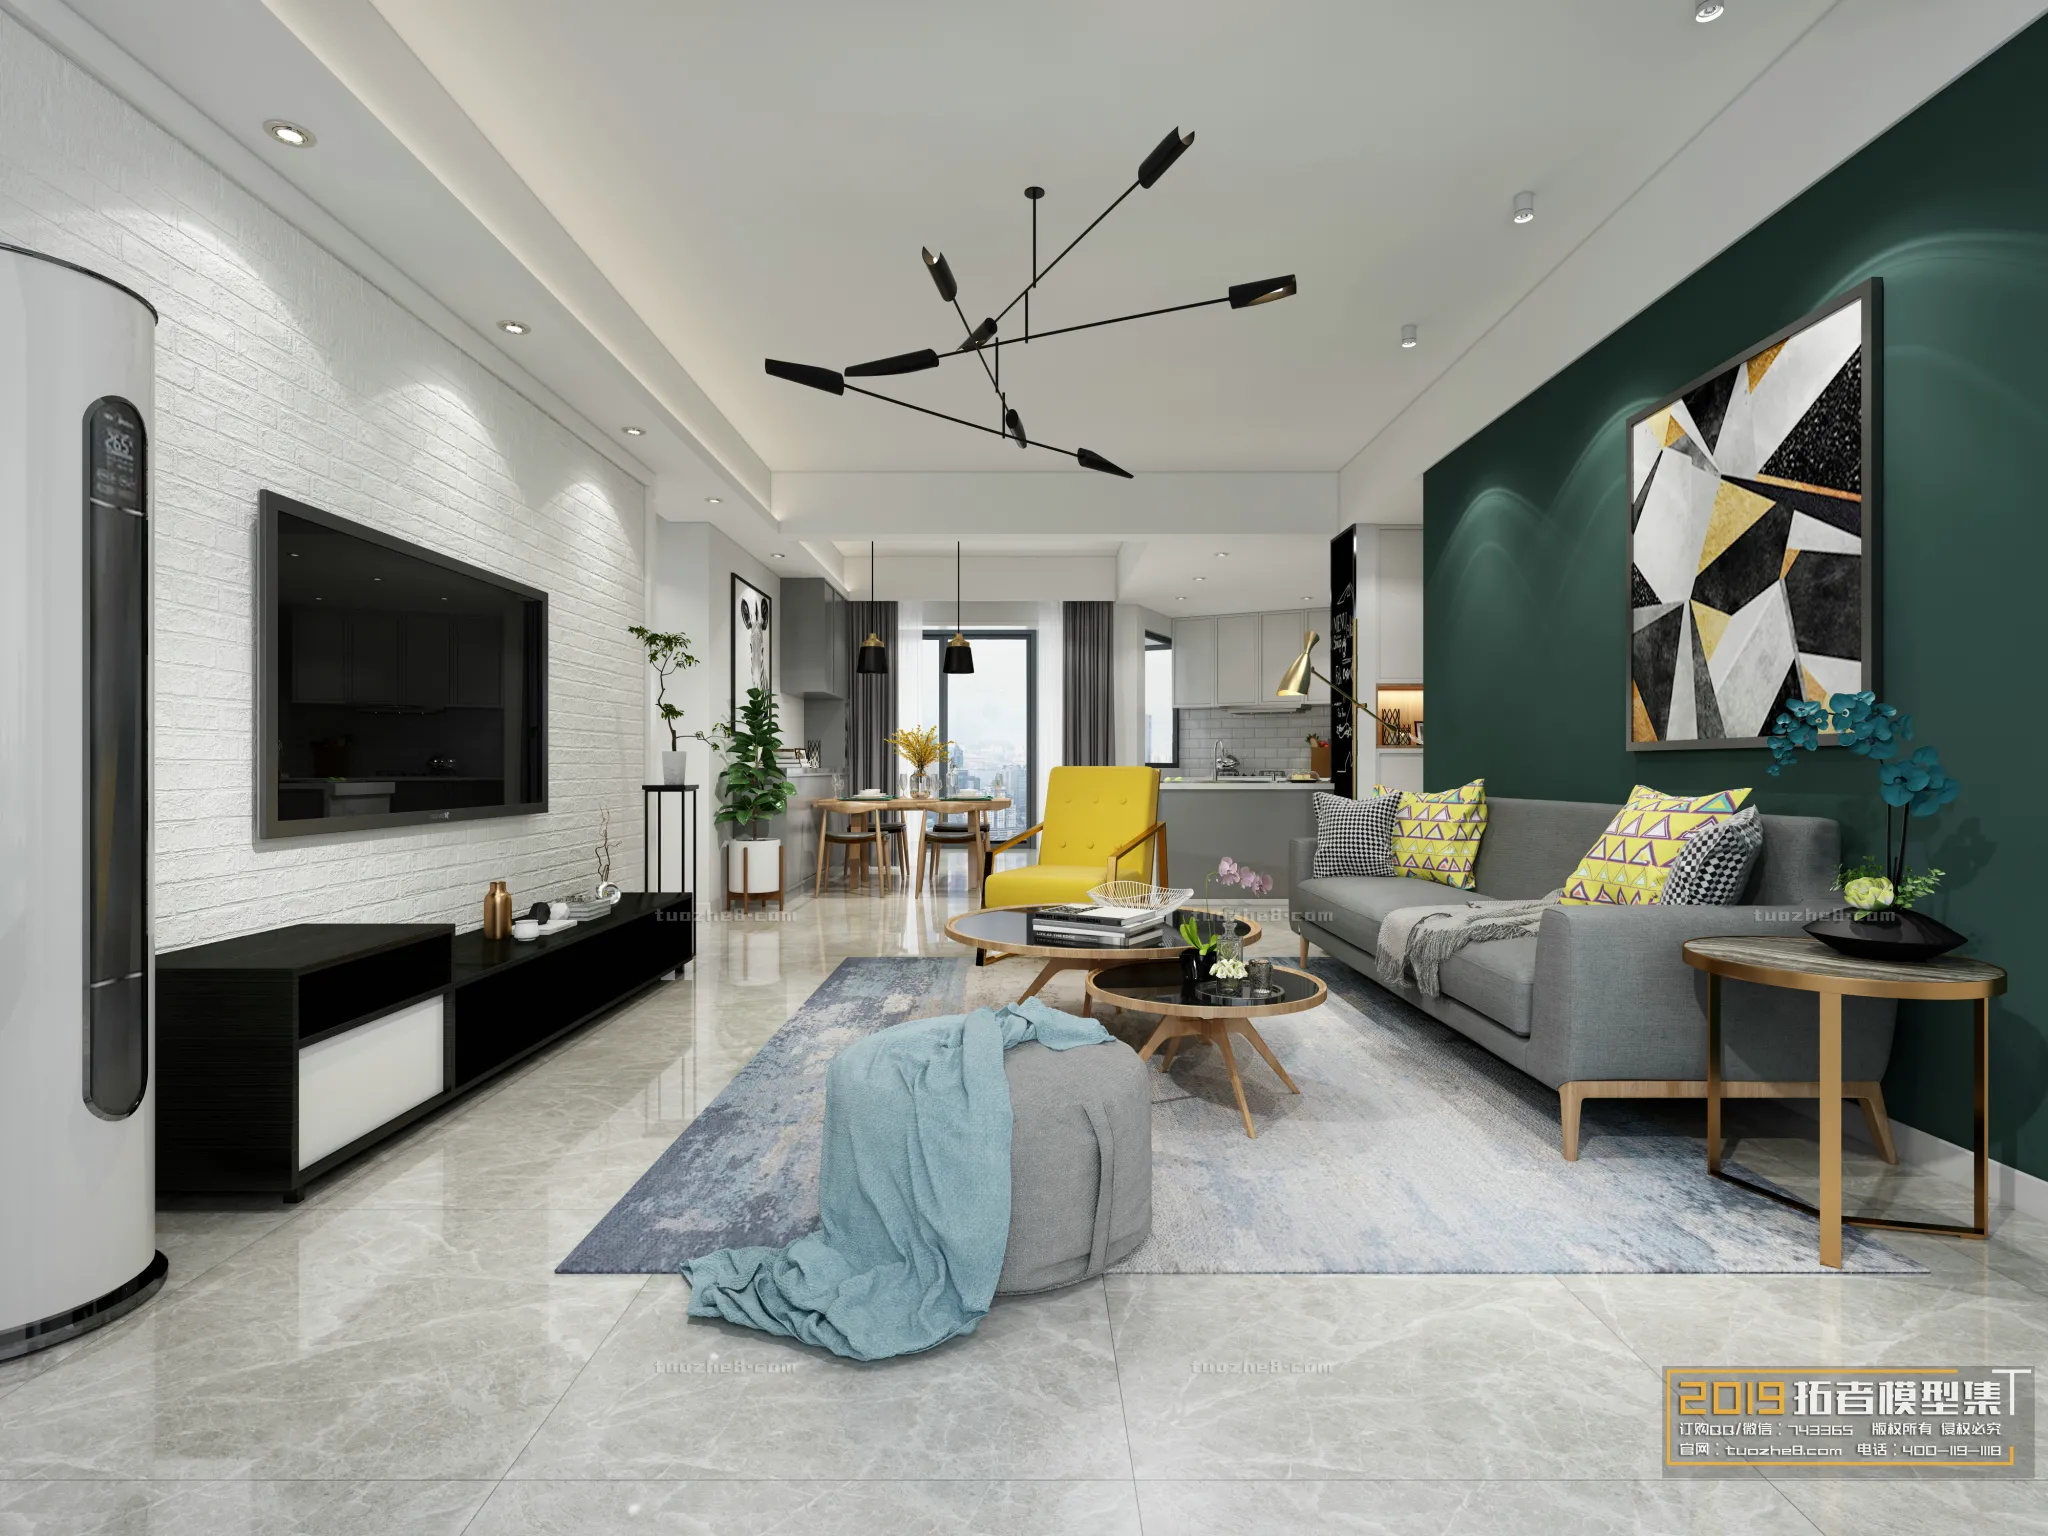 Extension Interior – LINGVING ROOM – NORDIC STYLES – 012